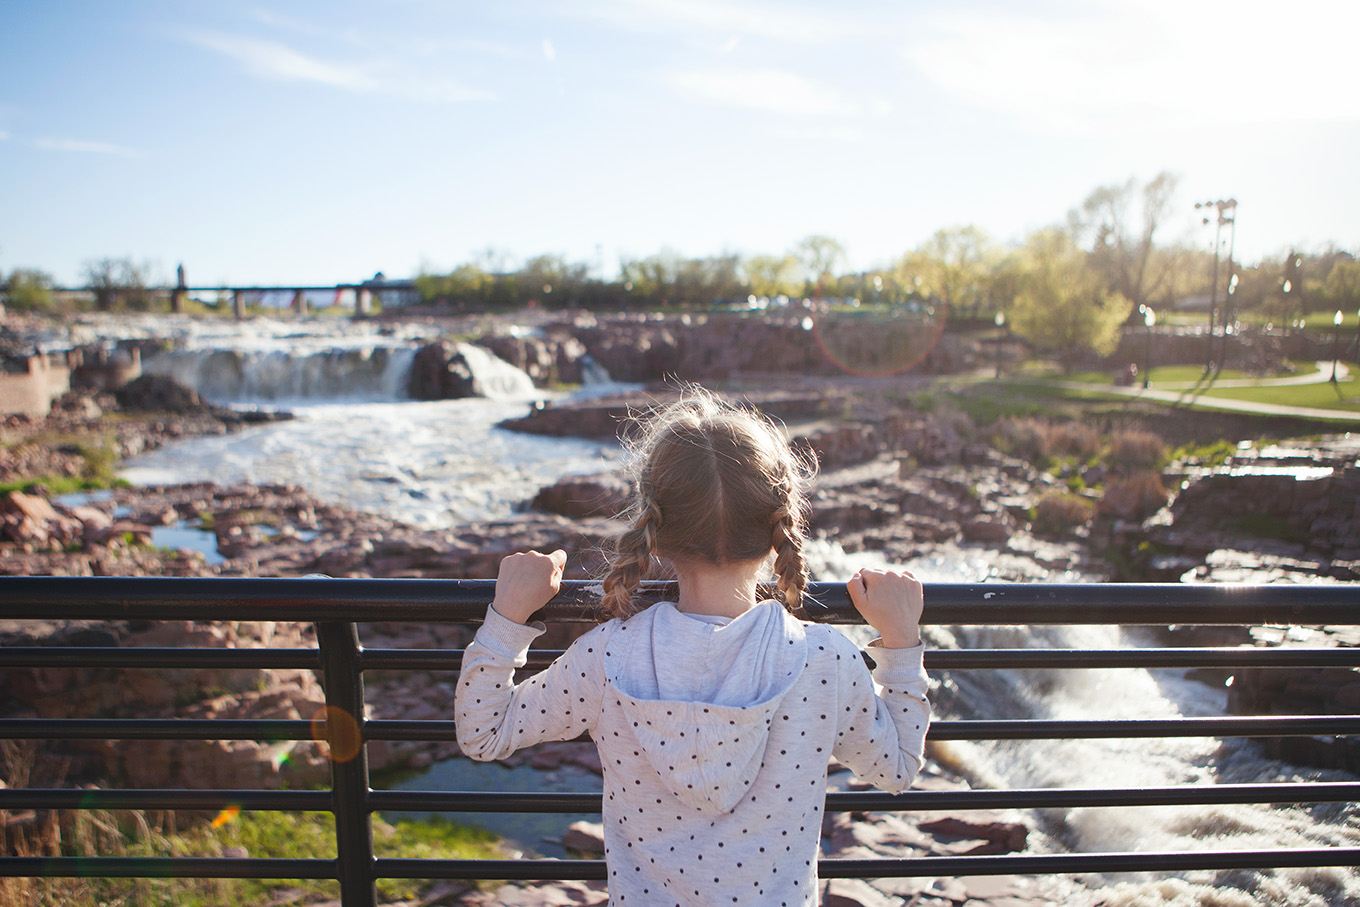 Local travel is fun and affordable! If you're in the area, South Dakota has so much to offer. Here are 8 kid-friendly destinations for your South Dakota road trip.